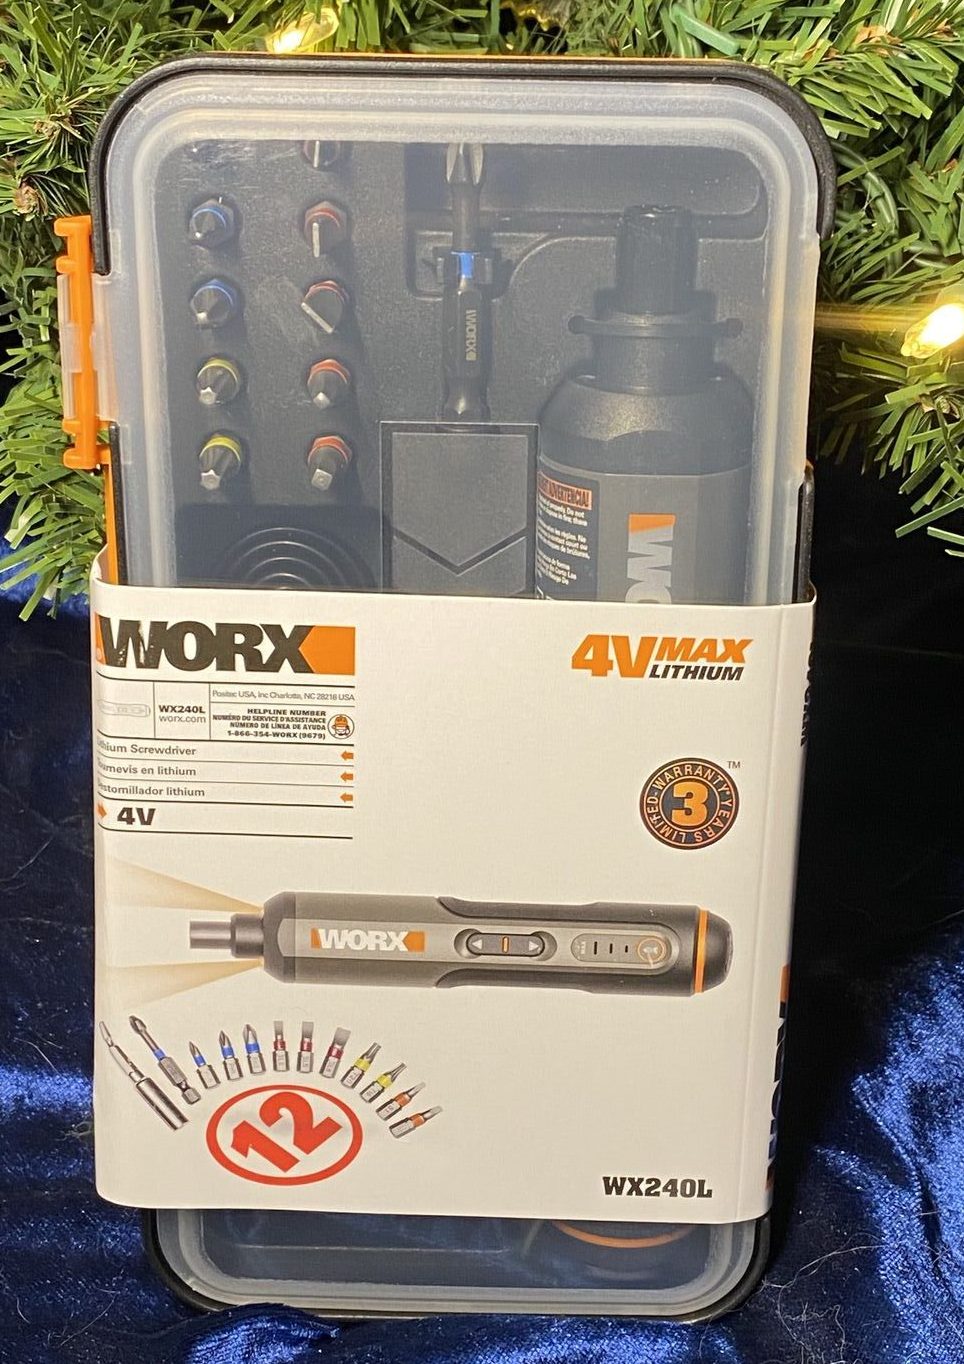 WORX Holiday Gift Guide